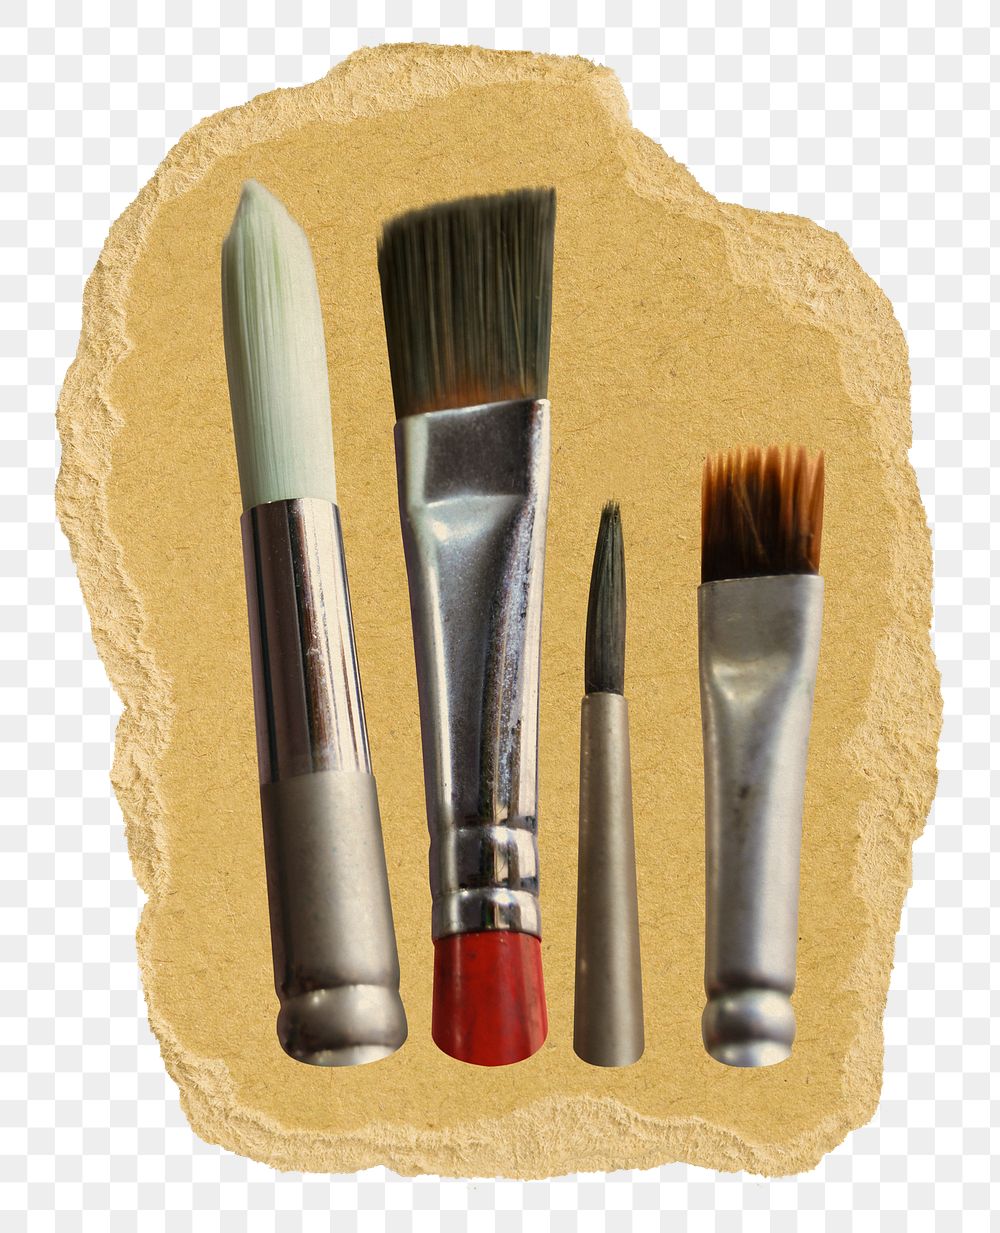 Paint brushes png sticker, ripped paper on transparent background